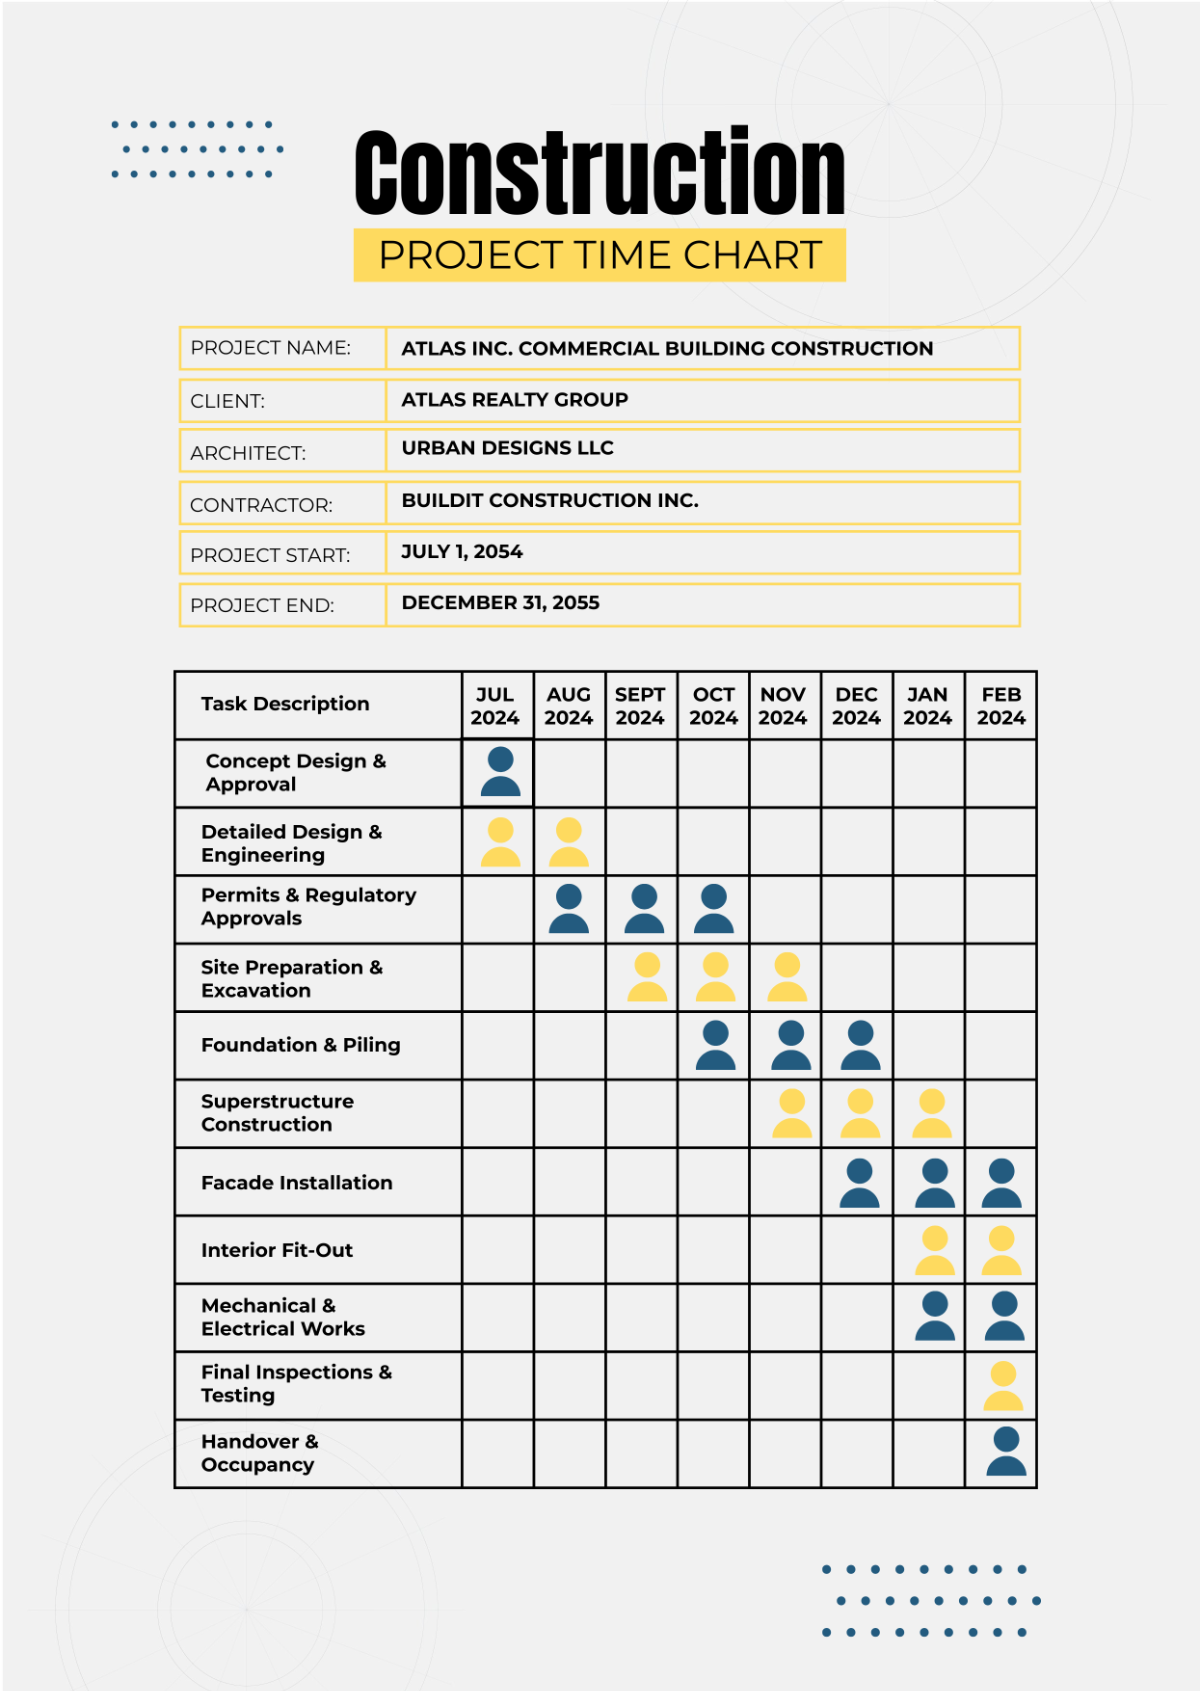 Construction Project Time Chart